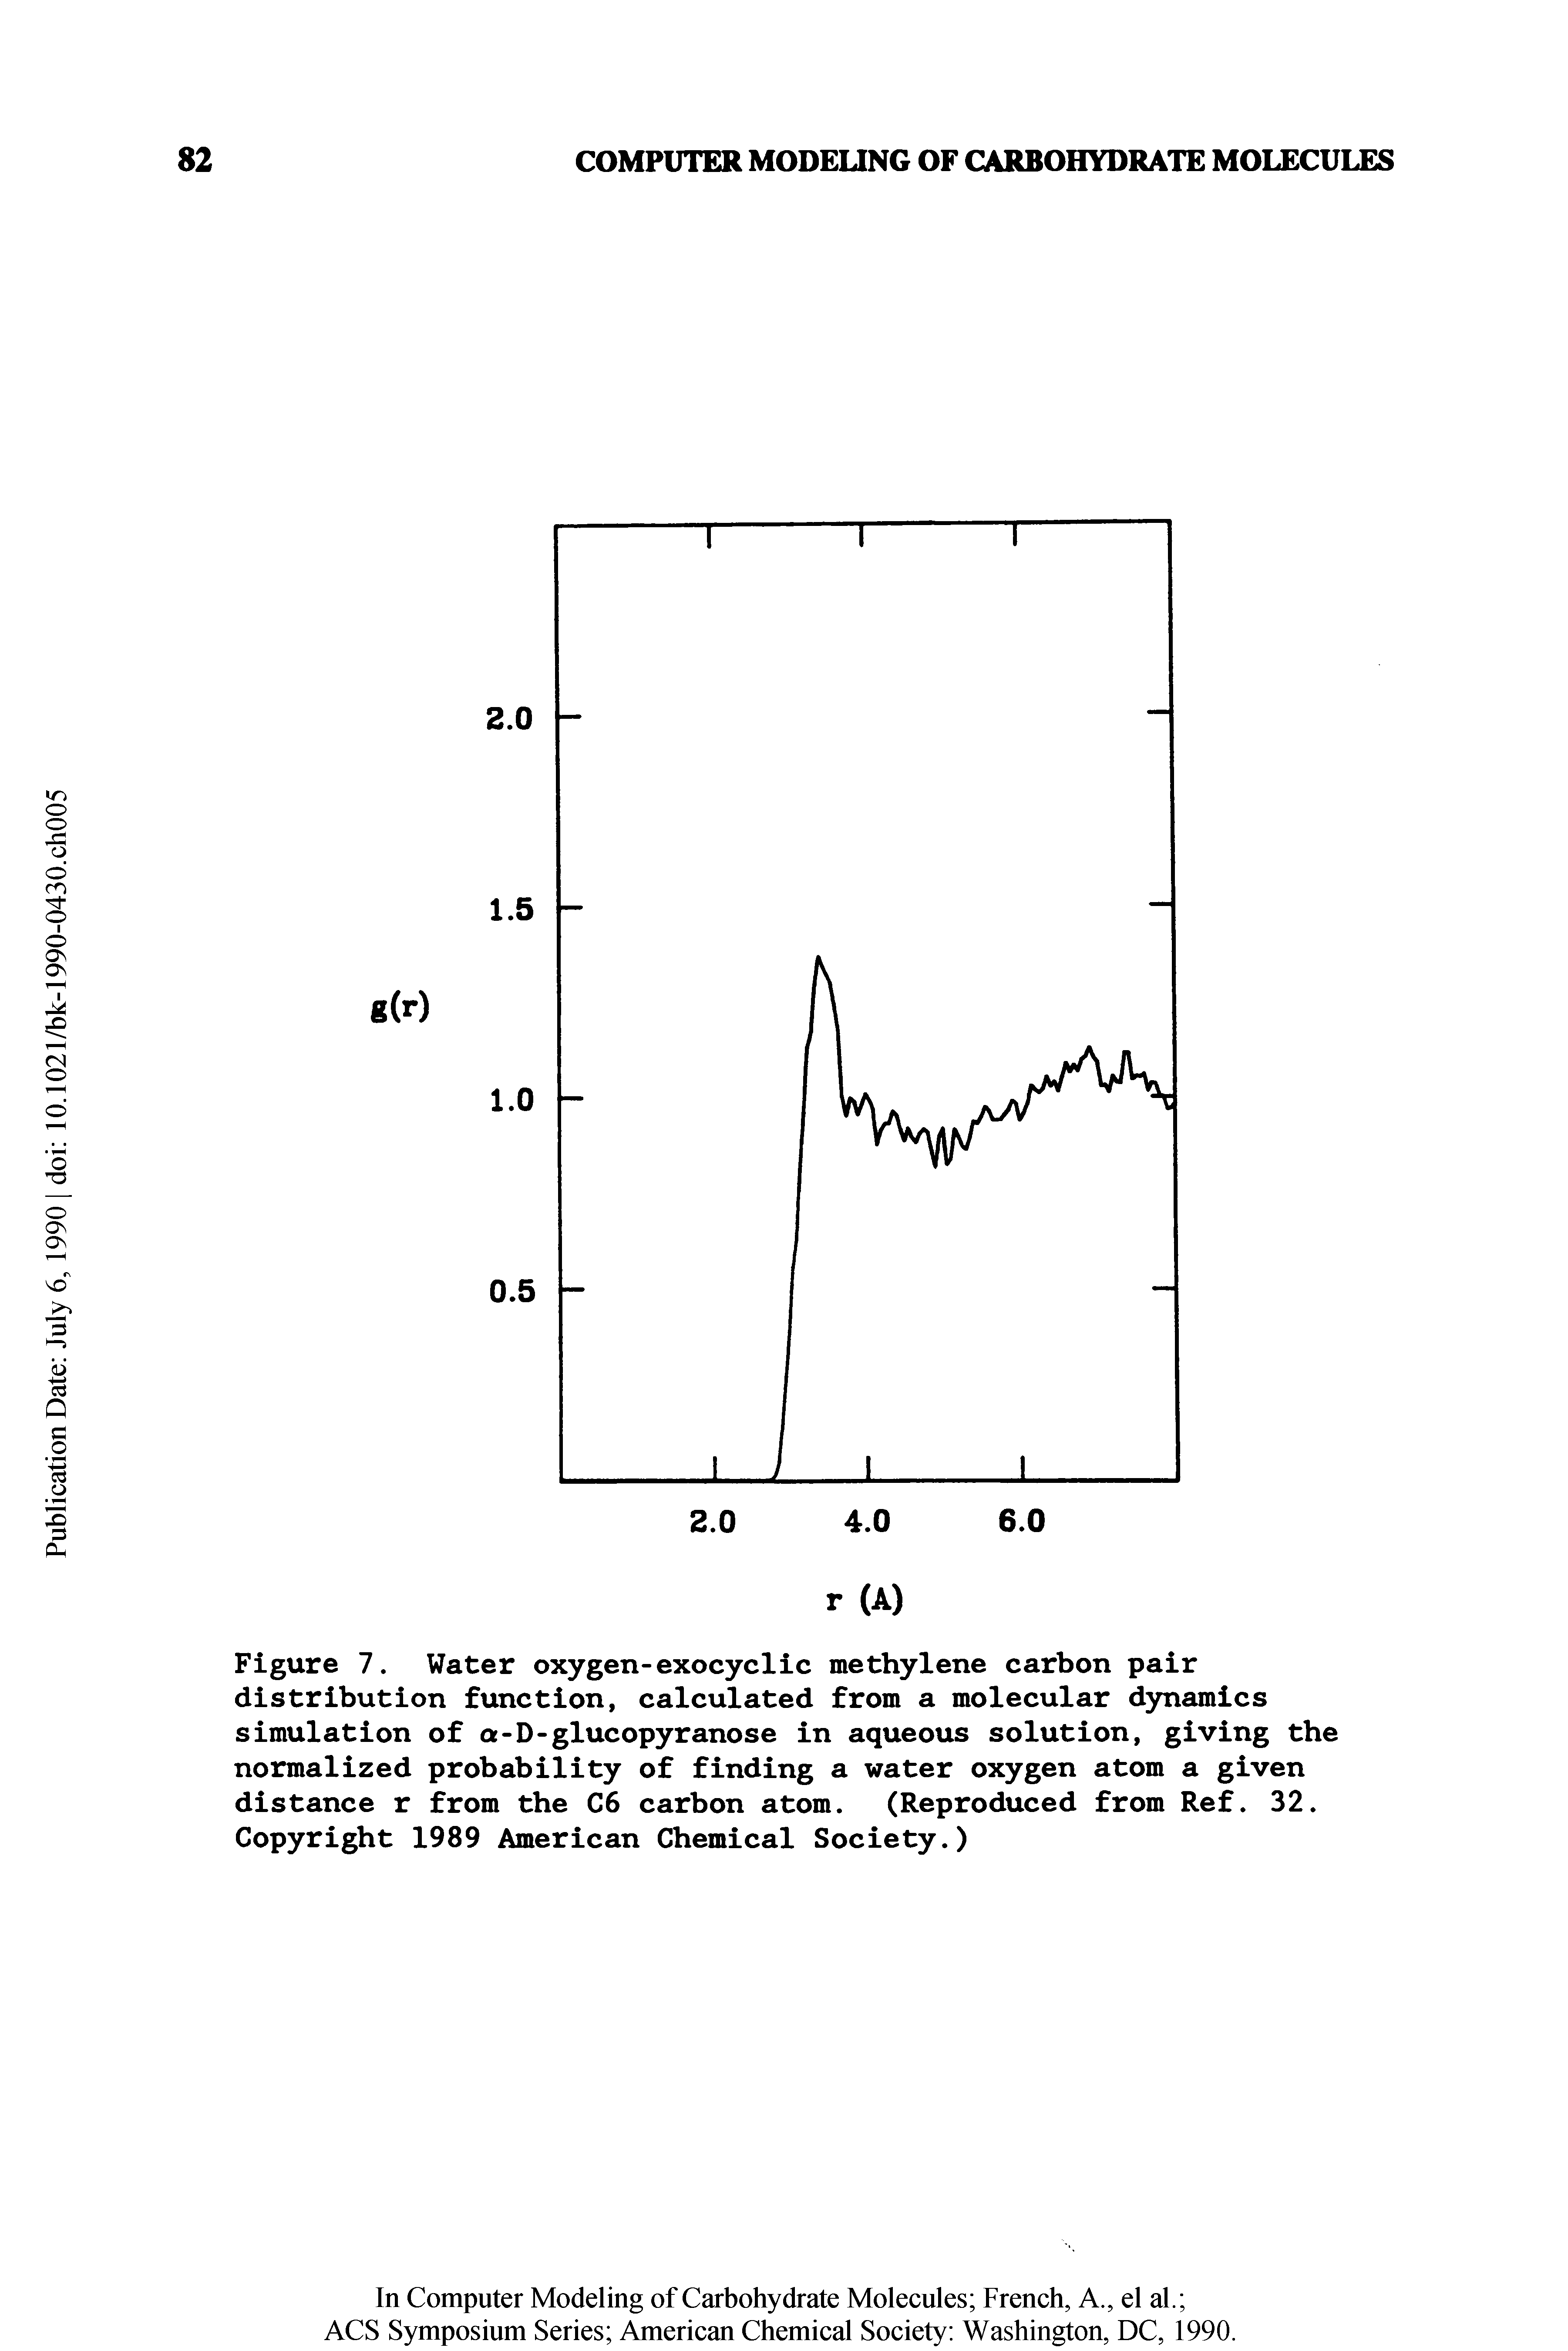 Figure 7. Water oxygen-exocyclic methylene carbon pair distribution function, calculated from a molecular dynamics simulation of a-D-glucopyranose in aqueous solution, giving the normalized probability of finding a water oxygen atom a given distance r from the C6 carbon atom. (Reproduced from Ref. 32. Copyright 1989 American Chemical Society.)...